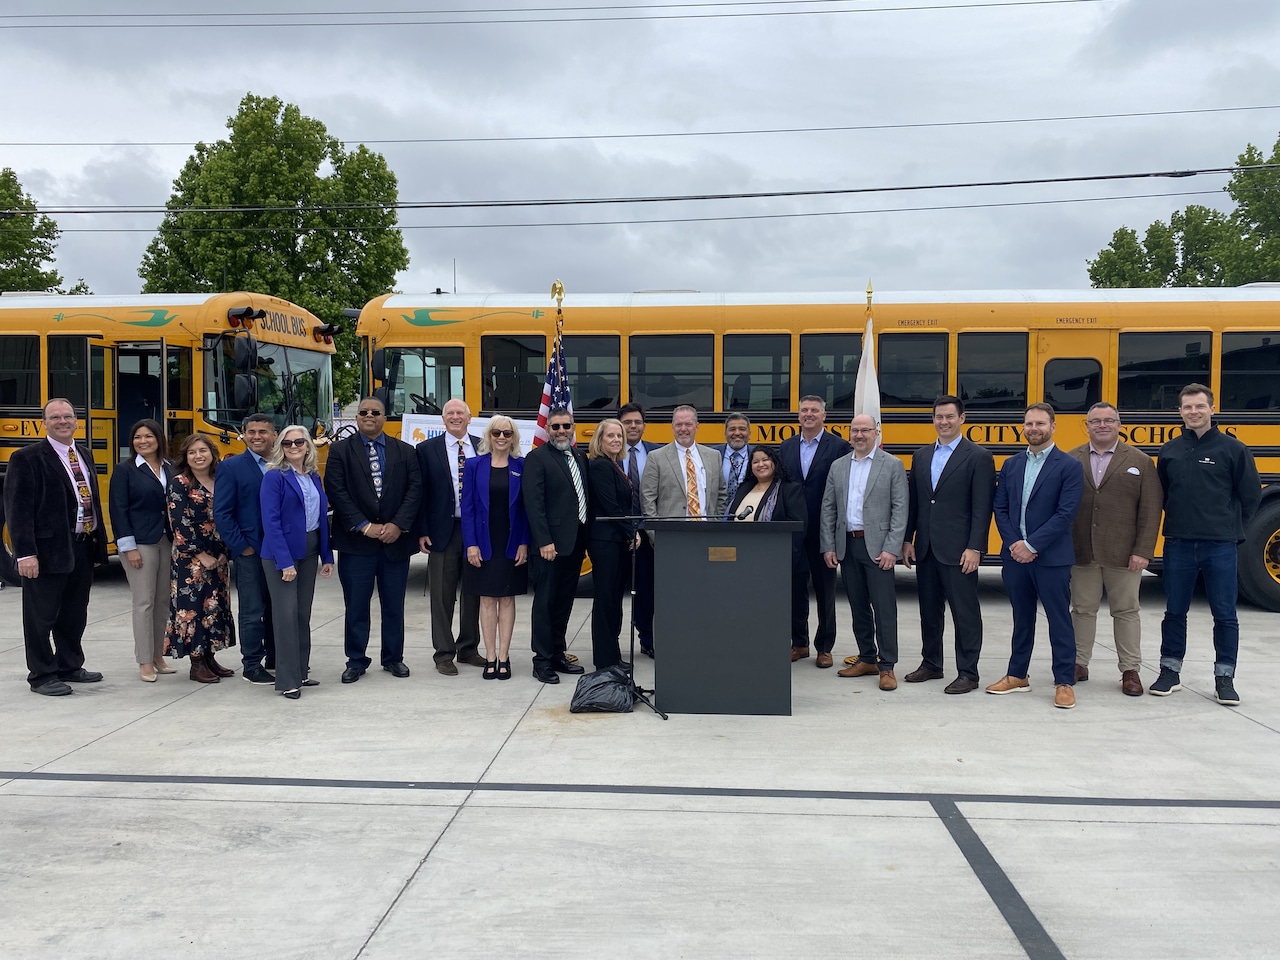 The Mobility House Partners with Modesto City Schools to Intelligently Manage Charging for One of U.S.’ Largest Electric School Bus Fleets